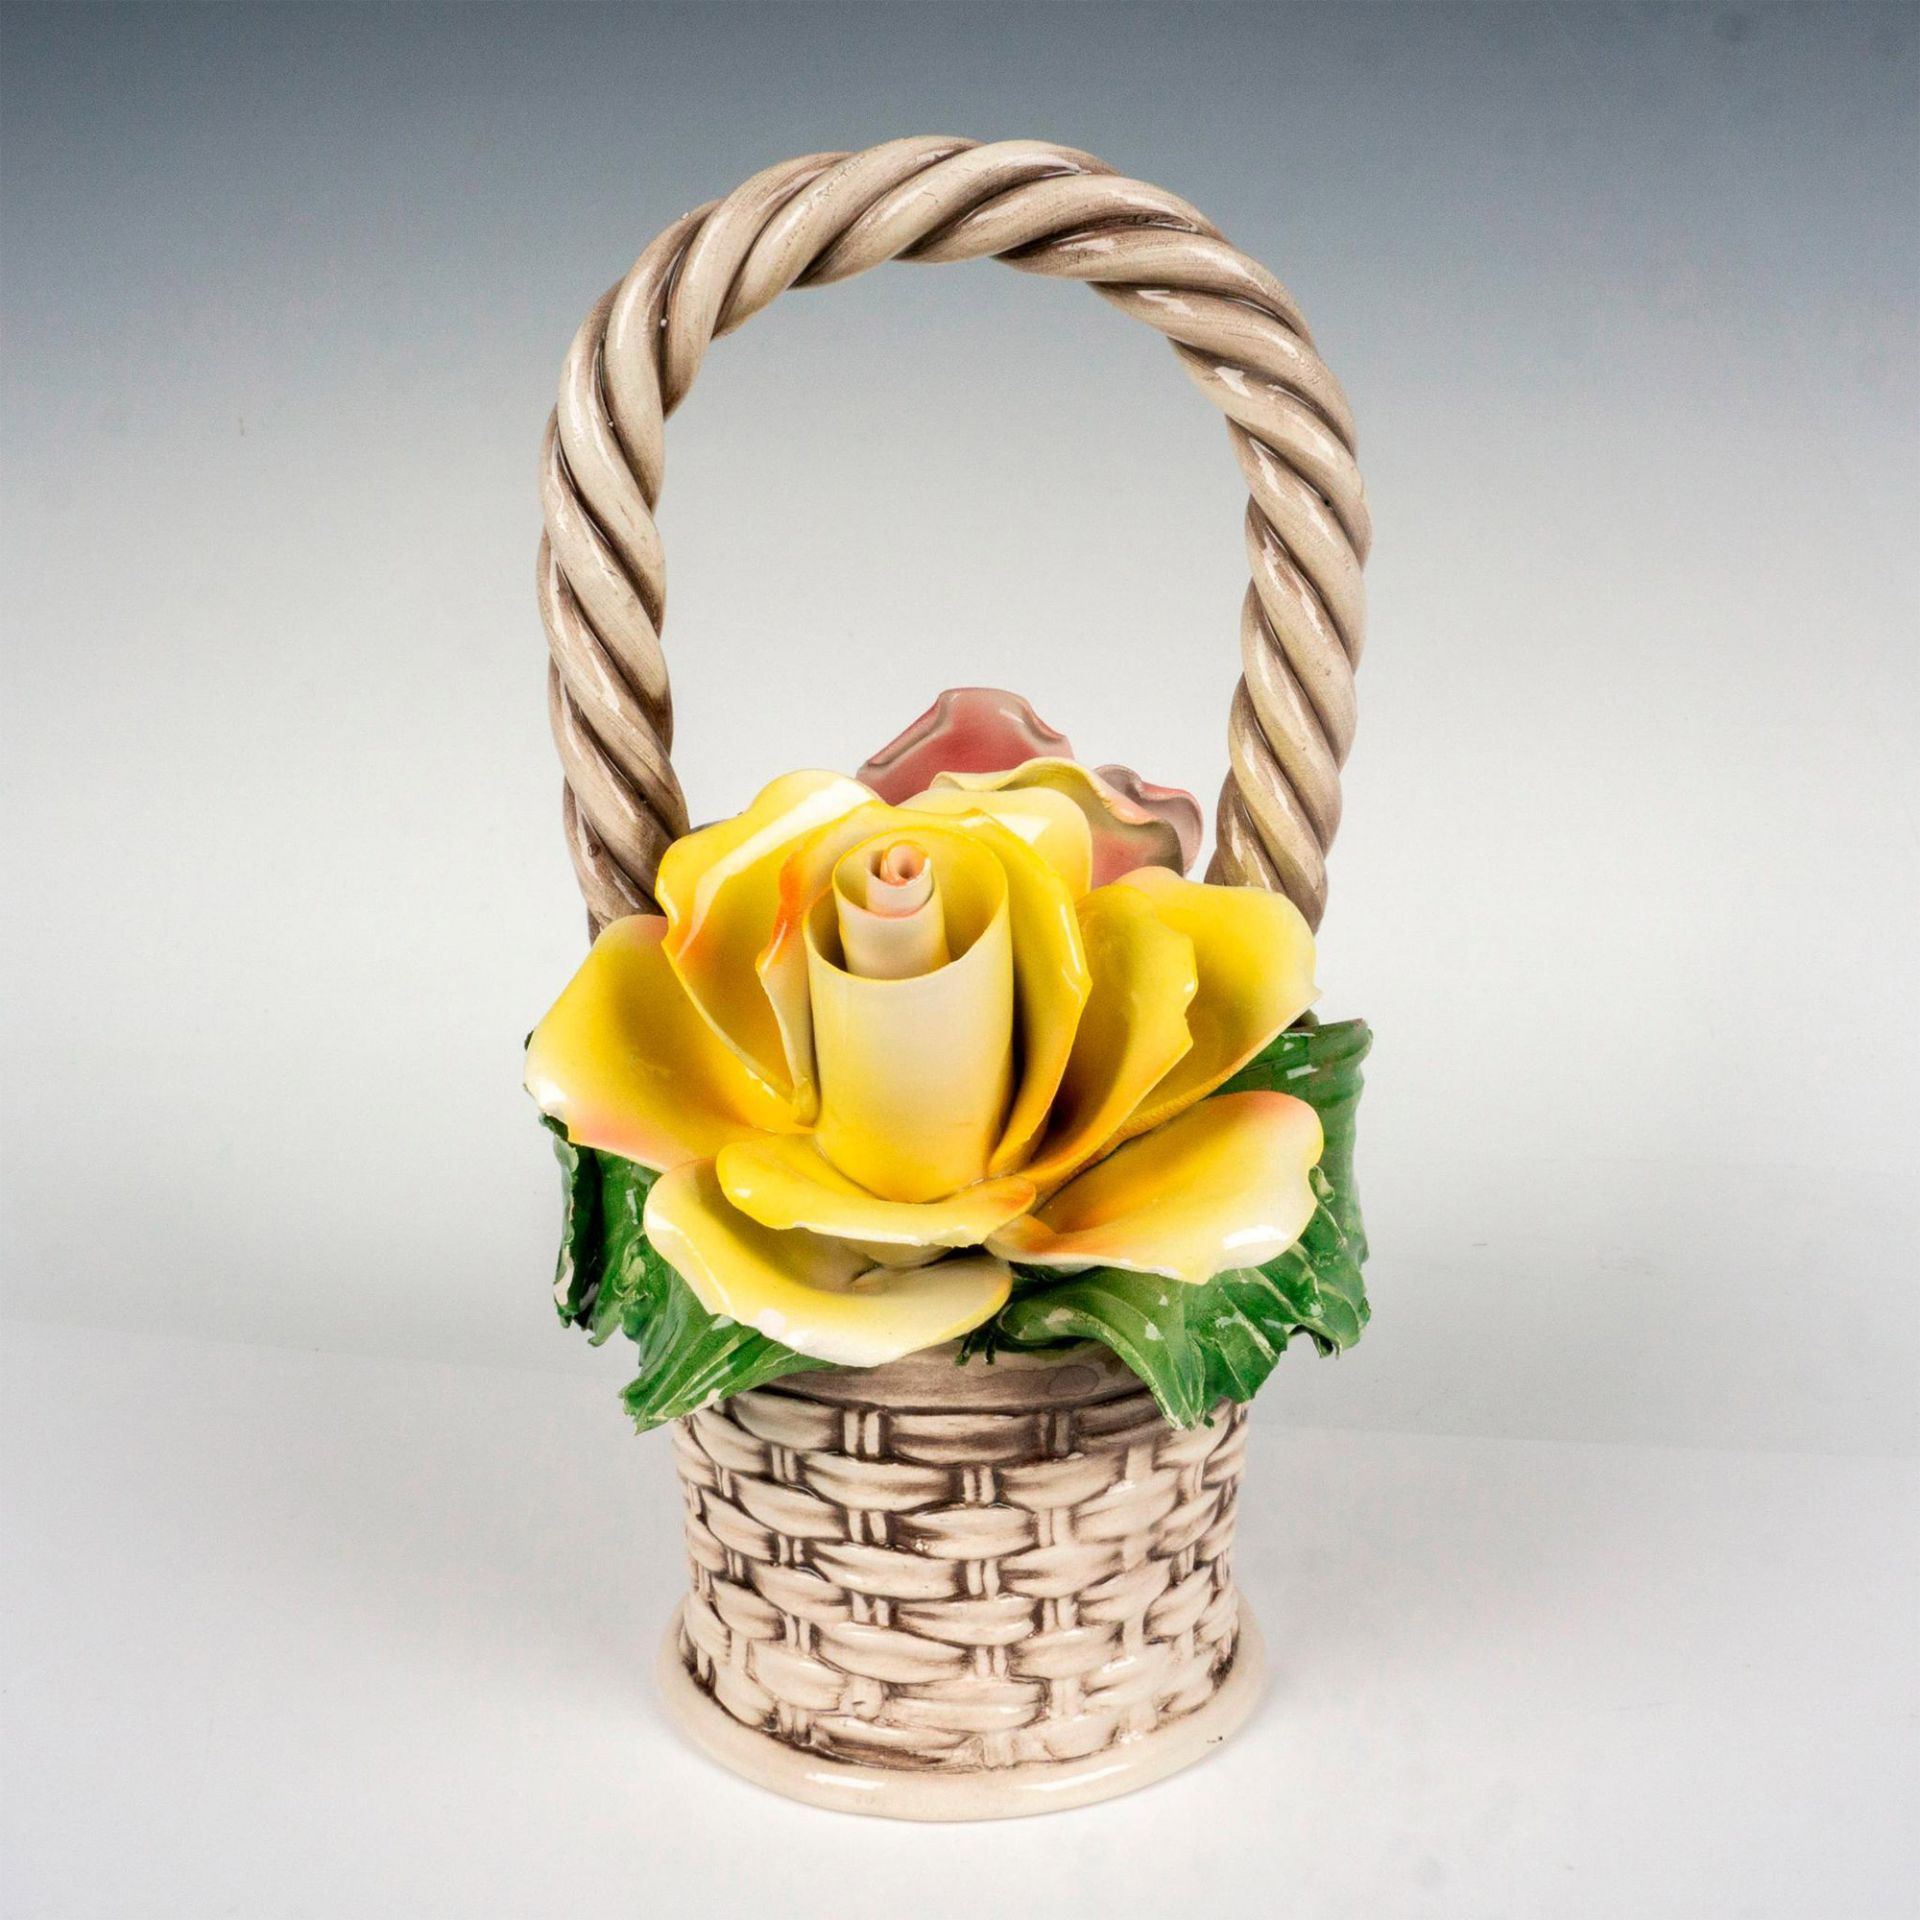 Vintage Capodimonte Rose Basket, Yellow and Red - Image 2 of 5